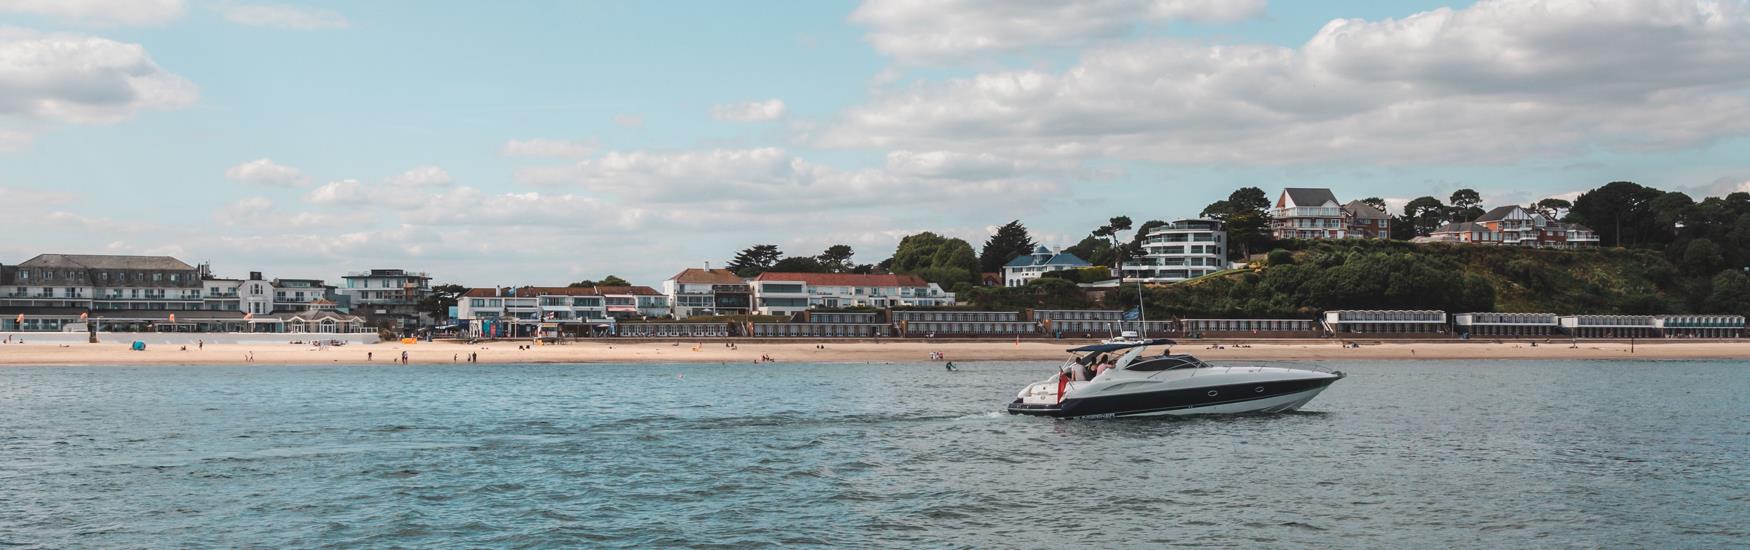 Speedboat pictured travelling along the coast, Sandbanks beach in the  background.